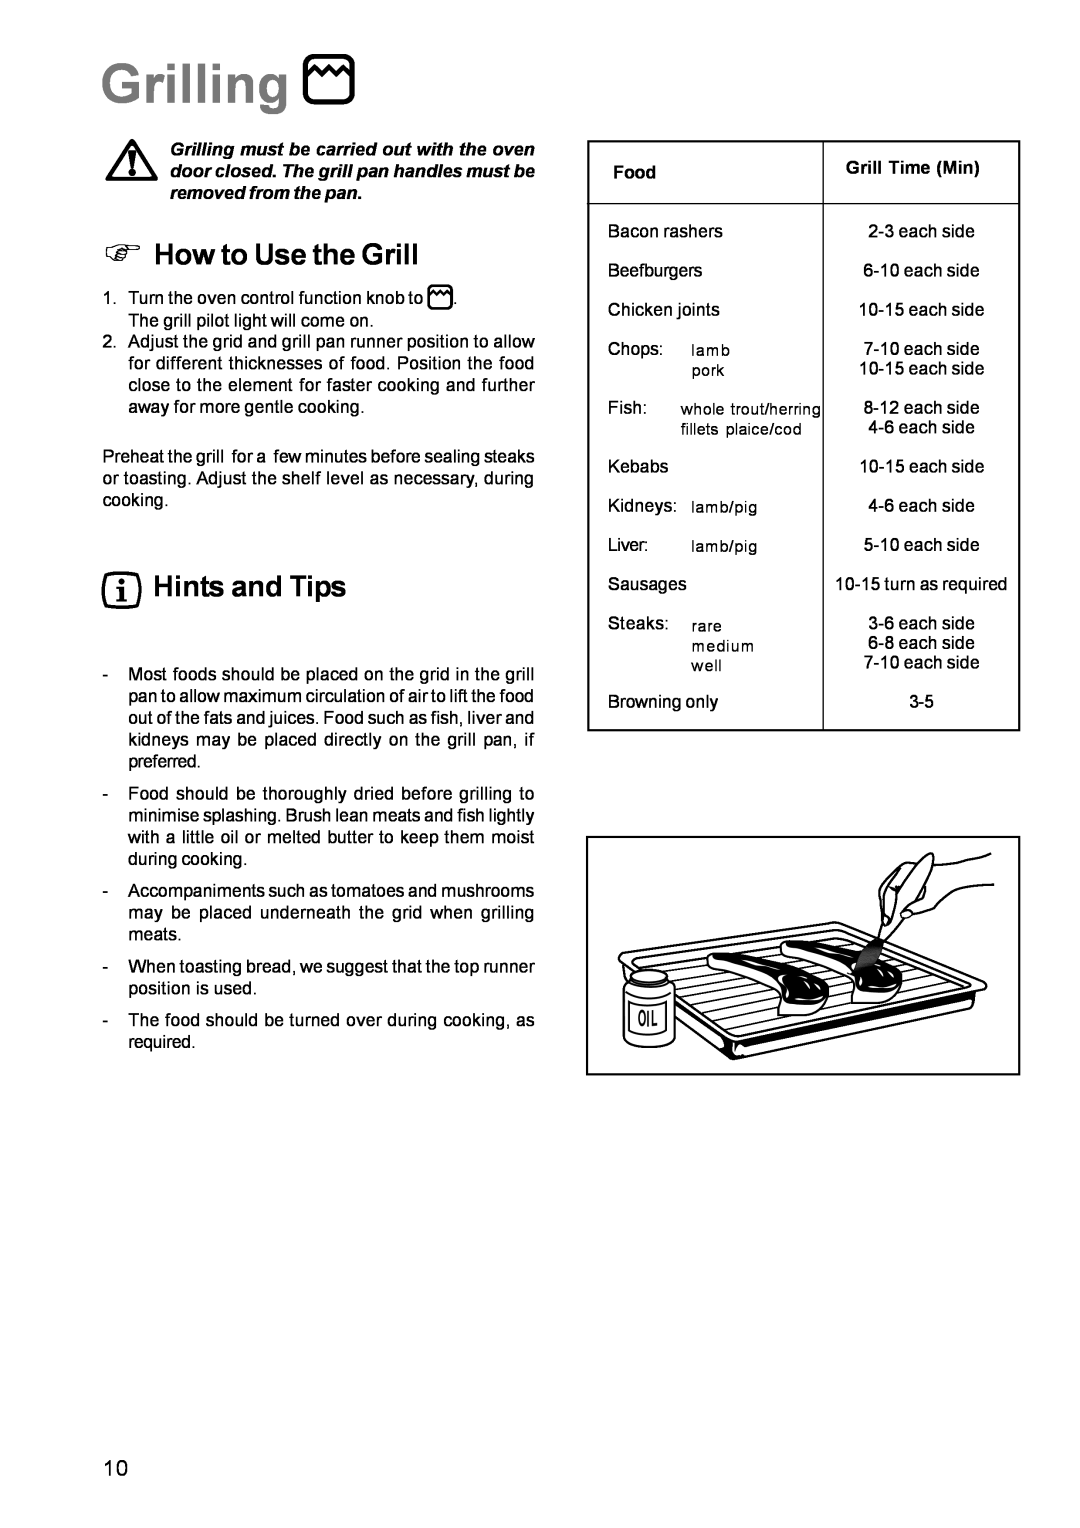 Electrolux CSIG 509 manual Grilling, ΦHow to Use the Grill, Hints and Tips 